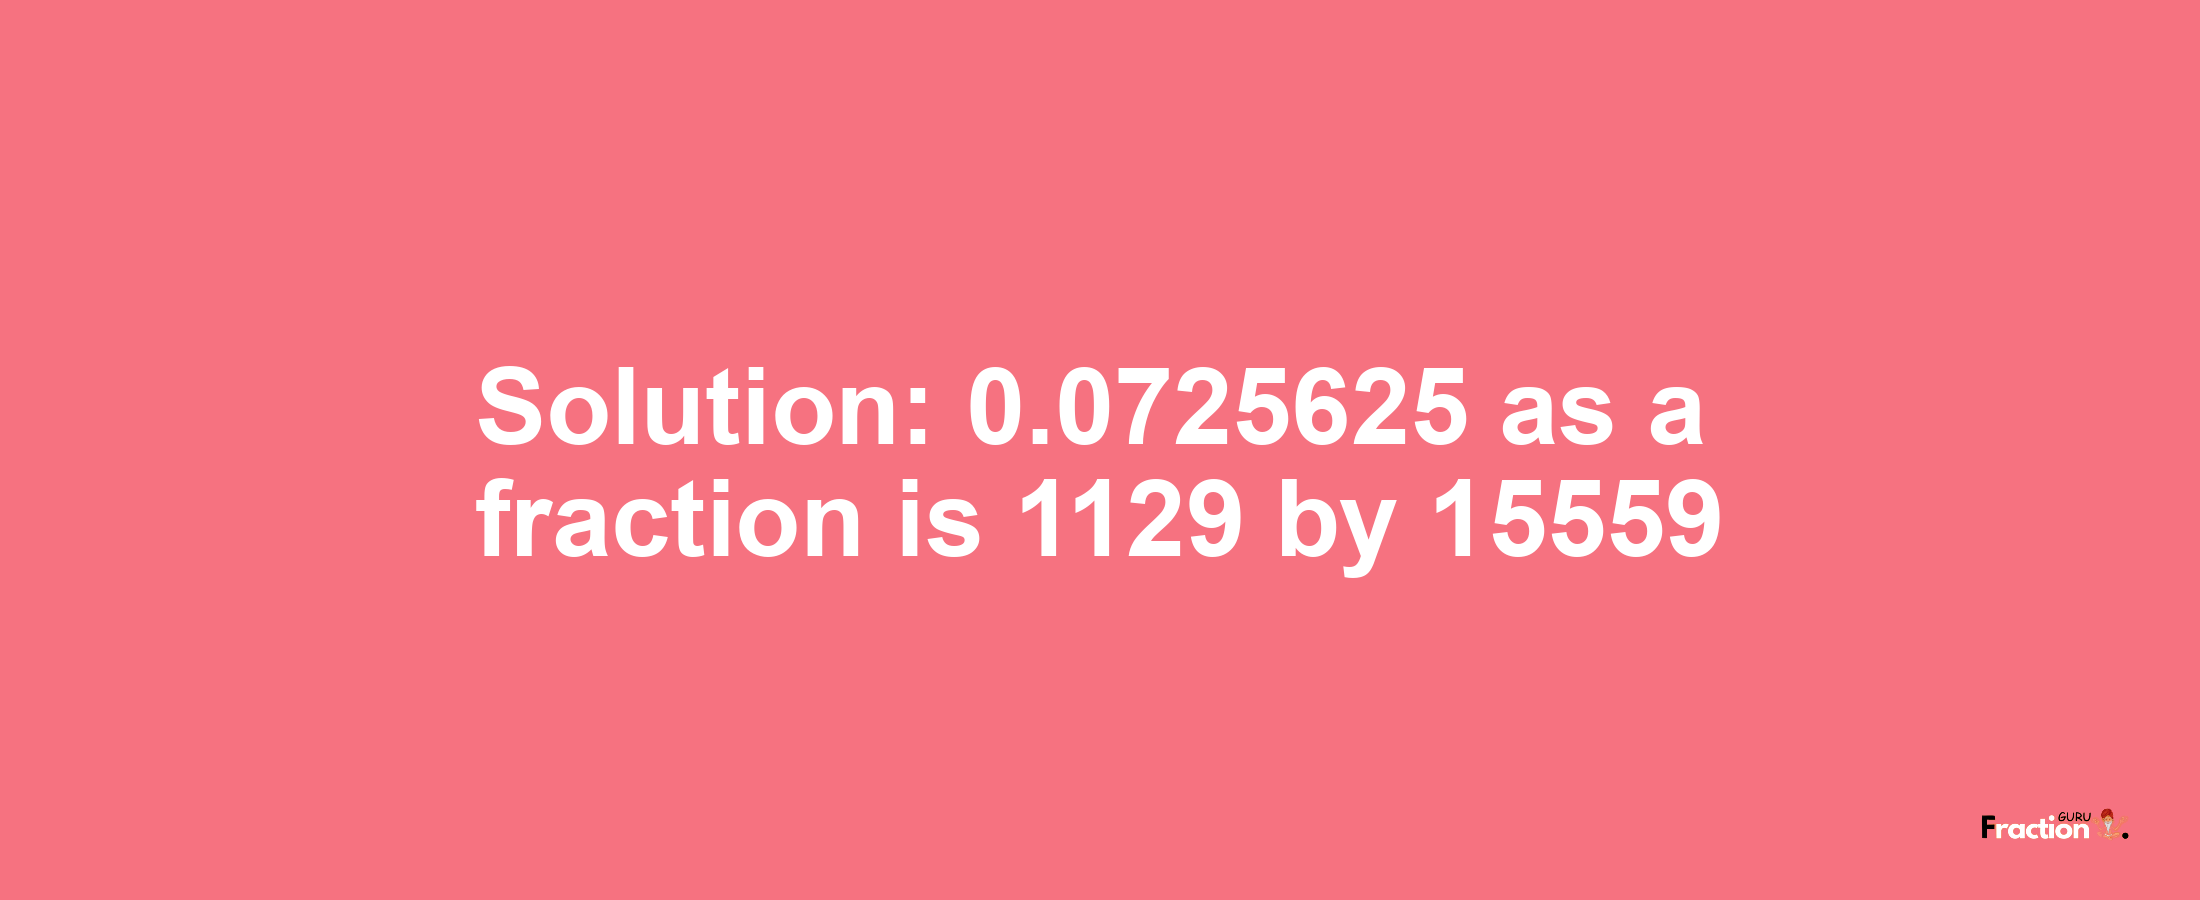 Solution:0.0725625 as a fraction is 1129/15559